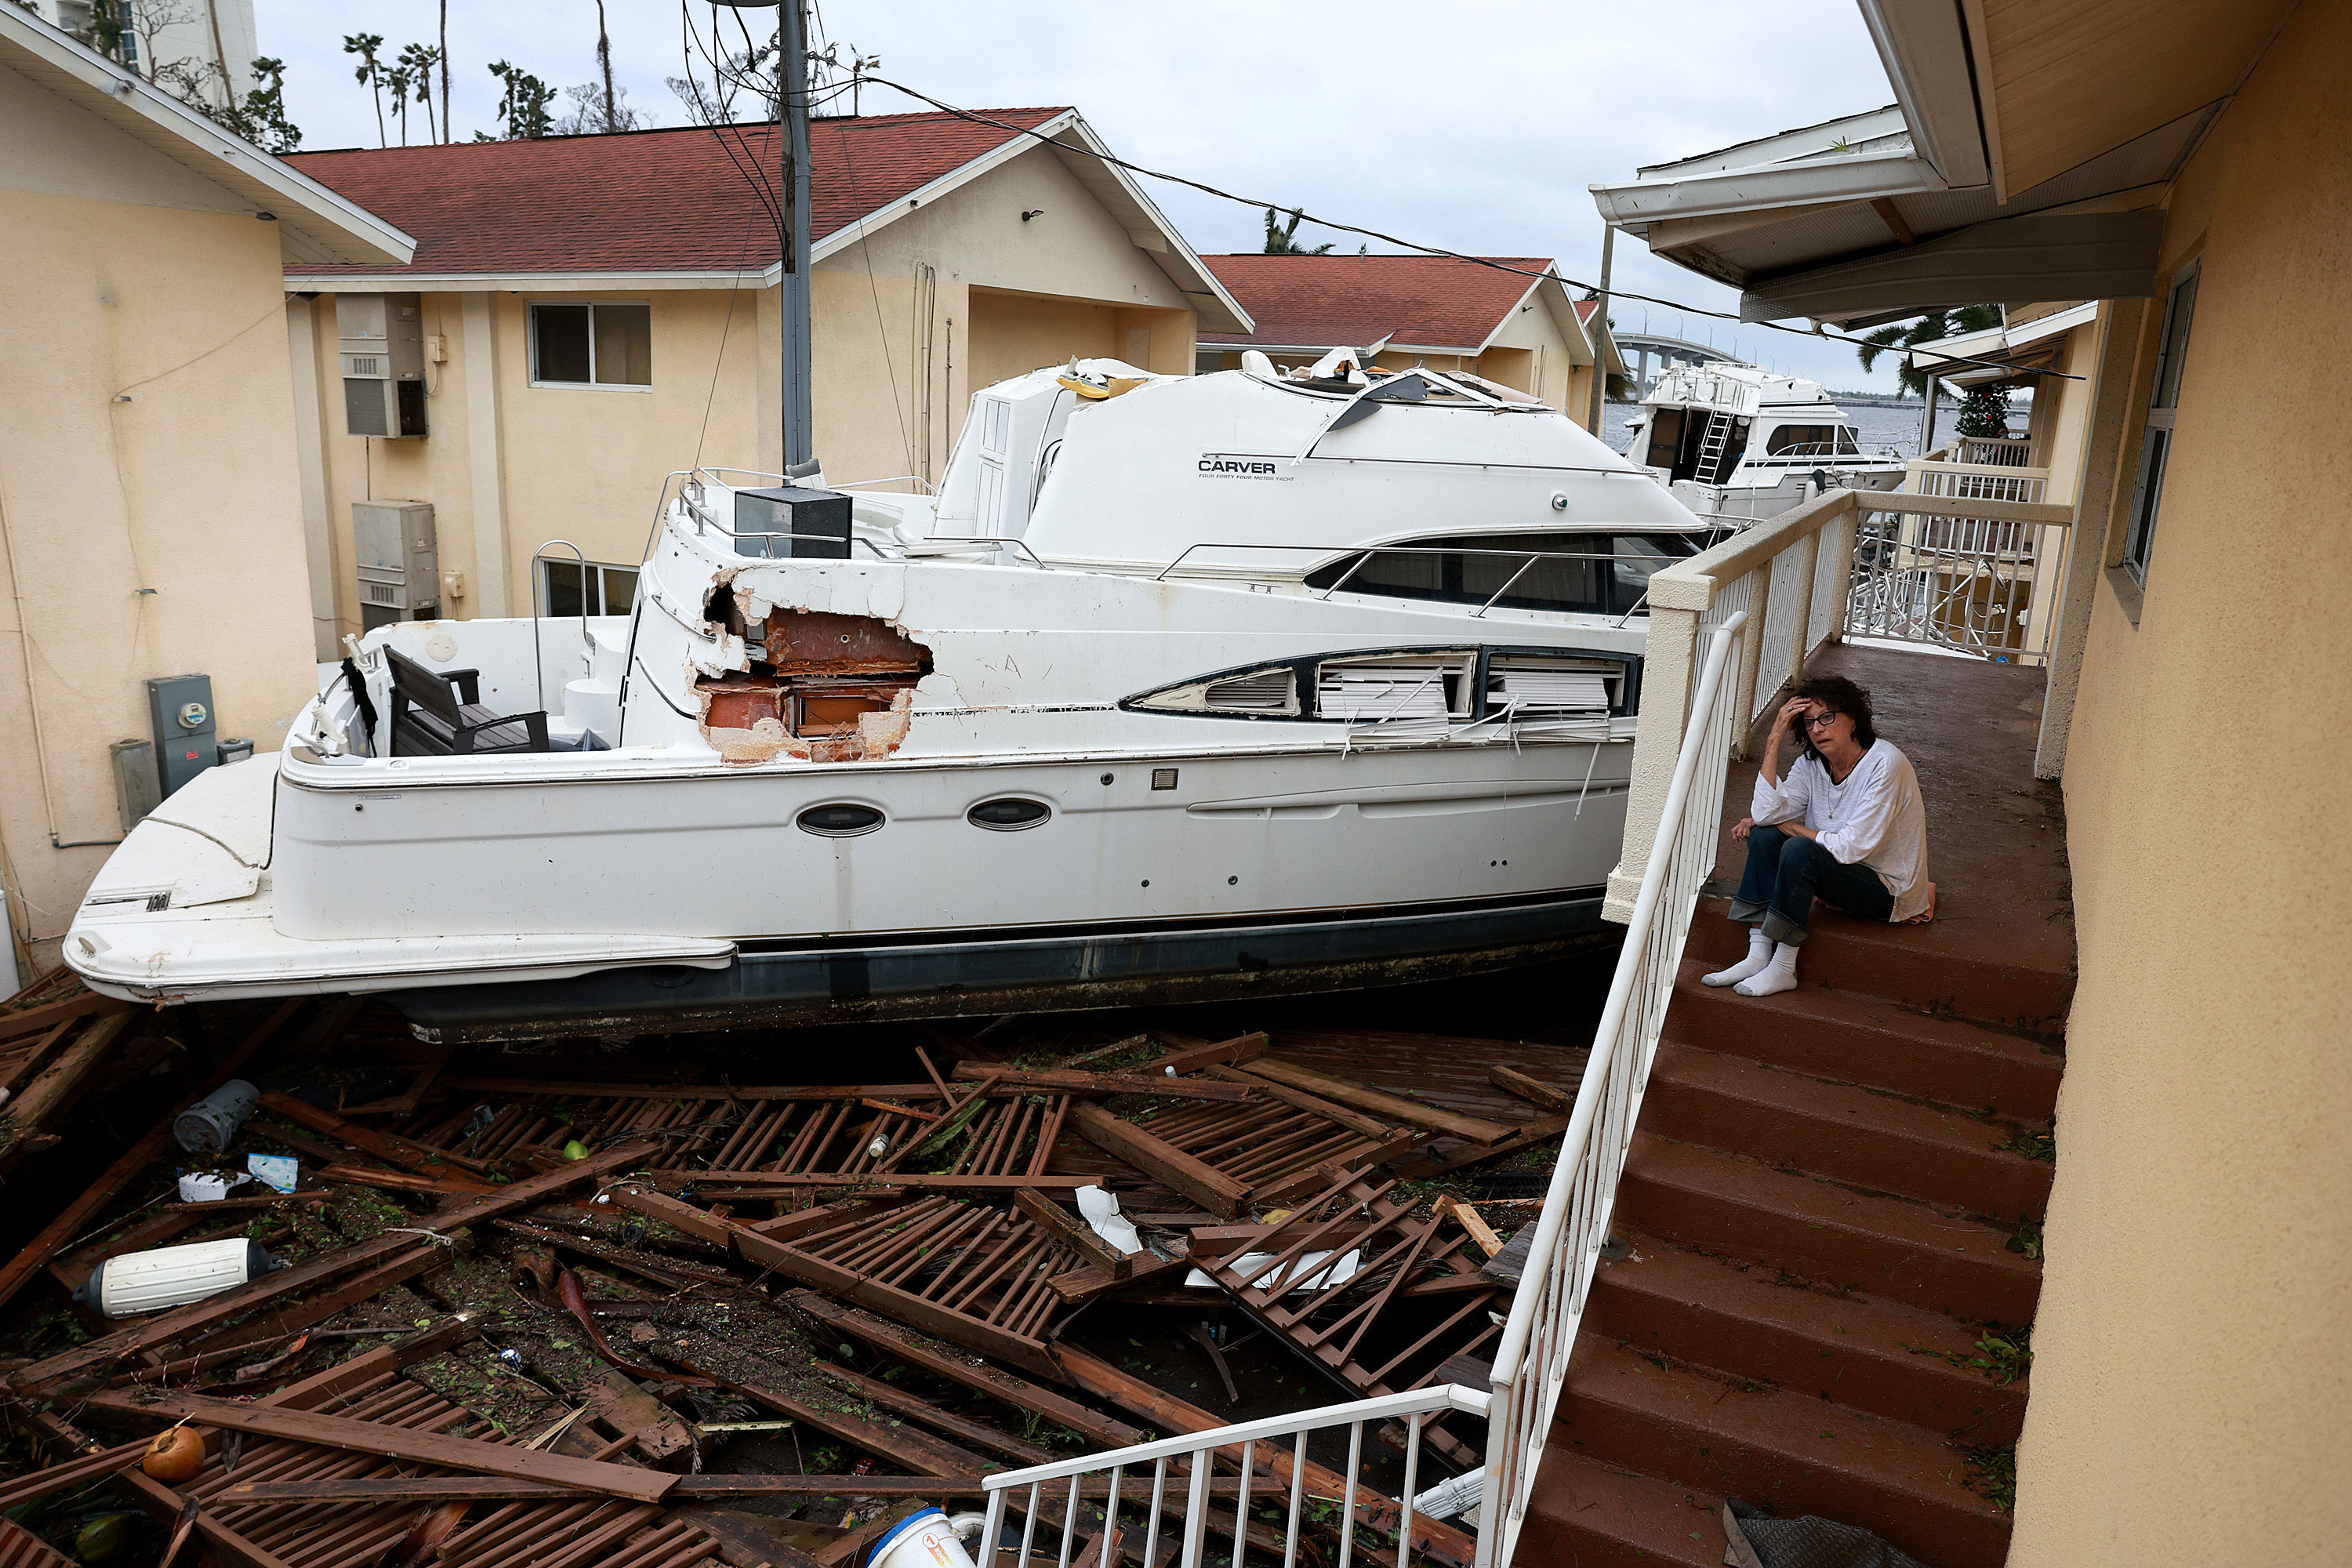 Brenda Brennan sits next to a boat that washed up against her apartment in Fort Myers, Florida, on Thursday.